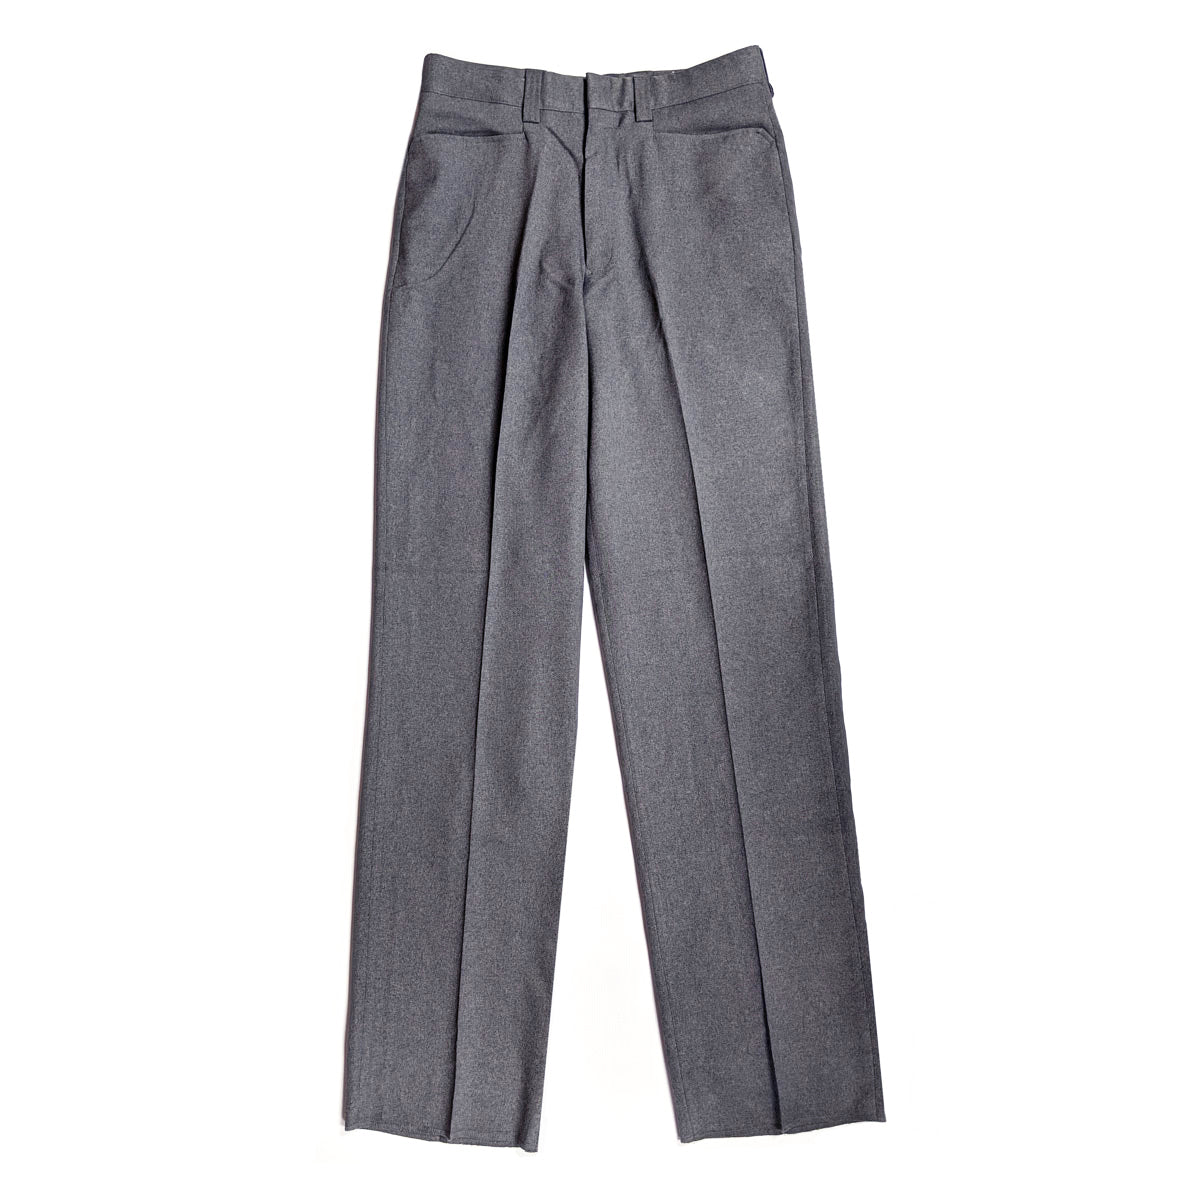 Smitty's Flat Front Heather Grey Base Pant